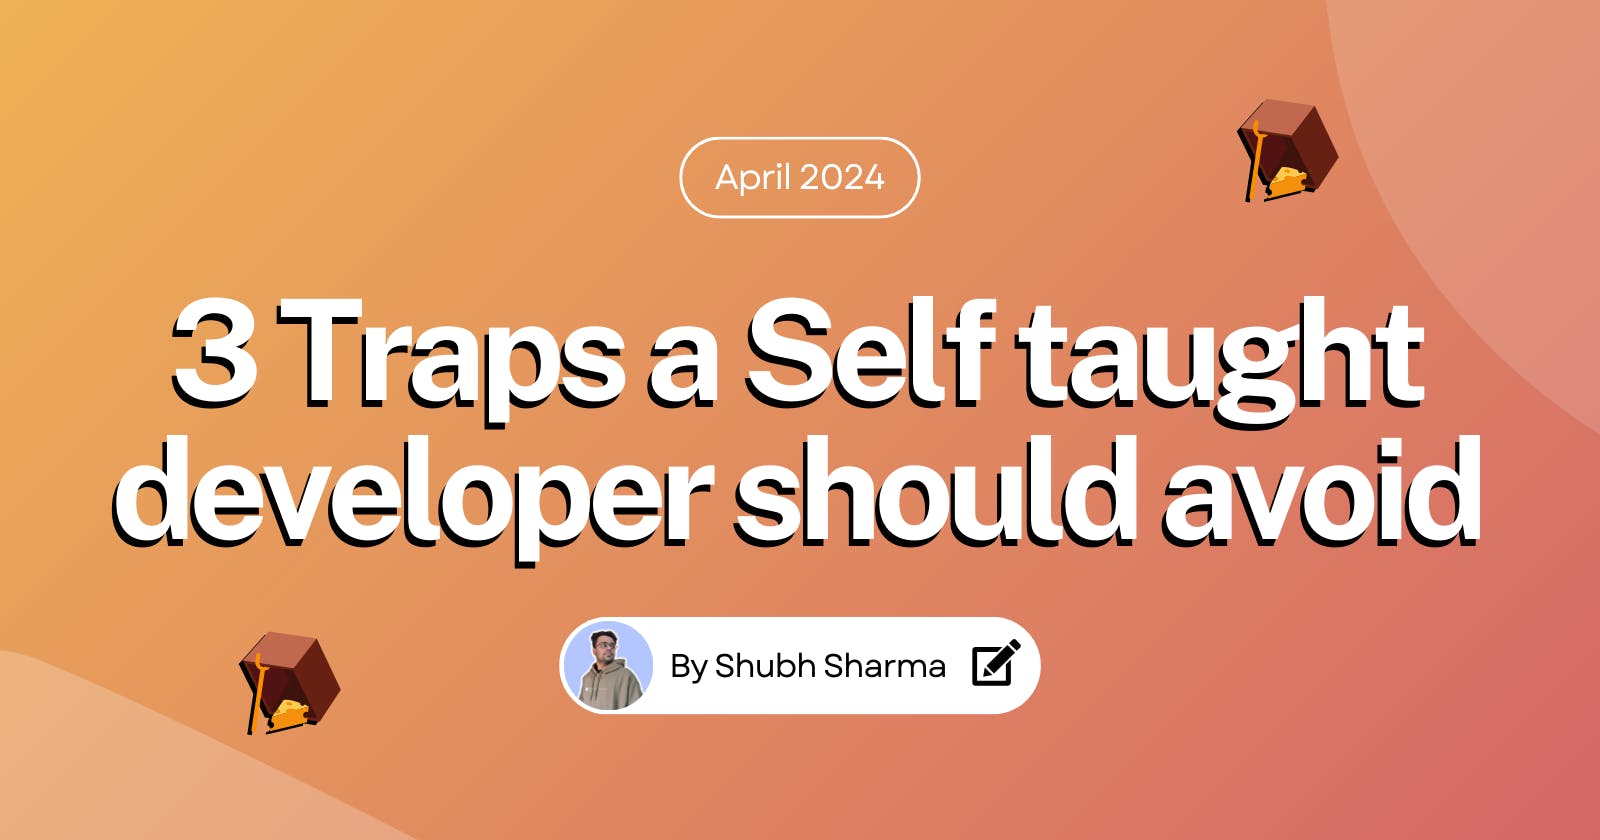 Self taught developers should avoid these traps